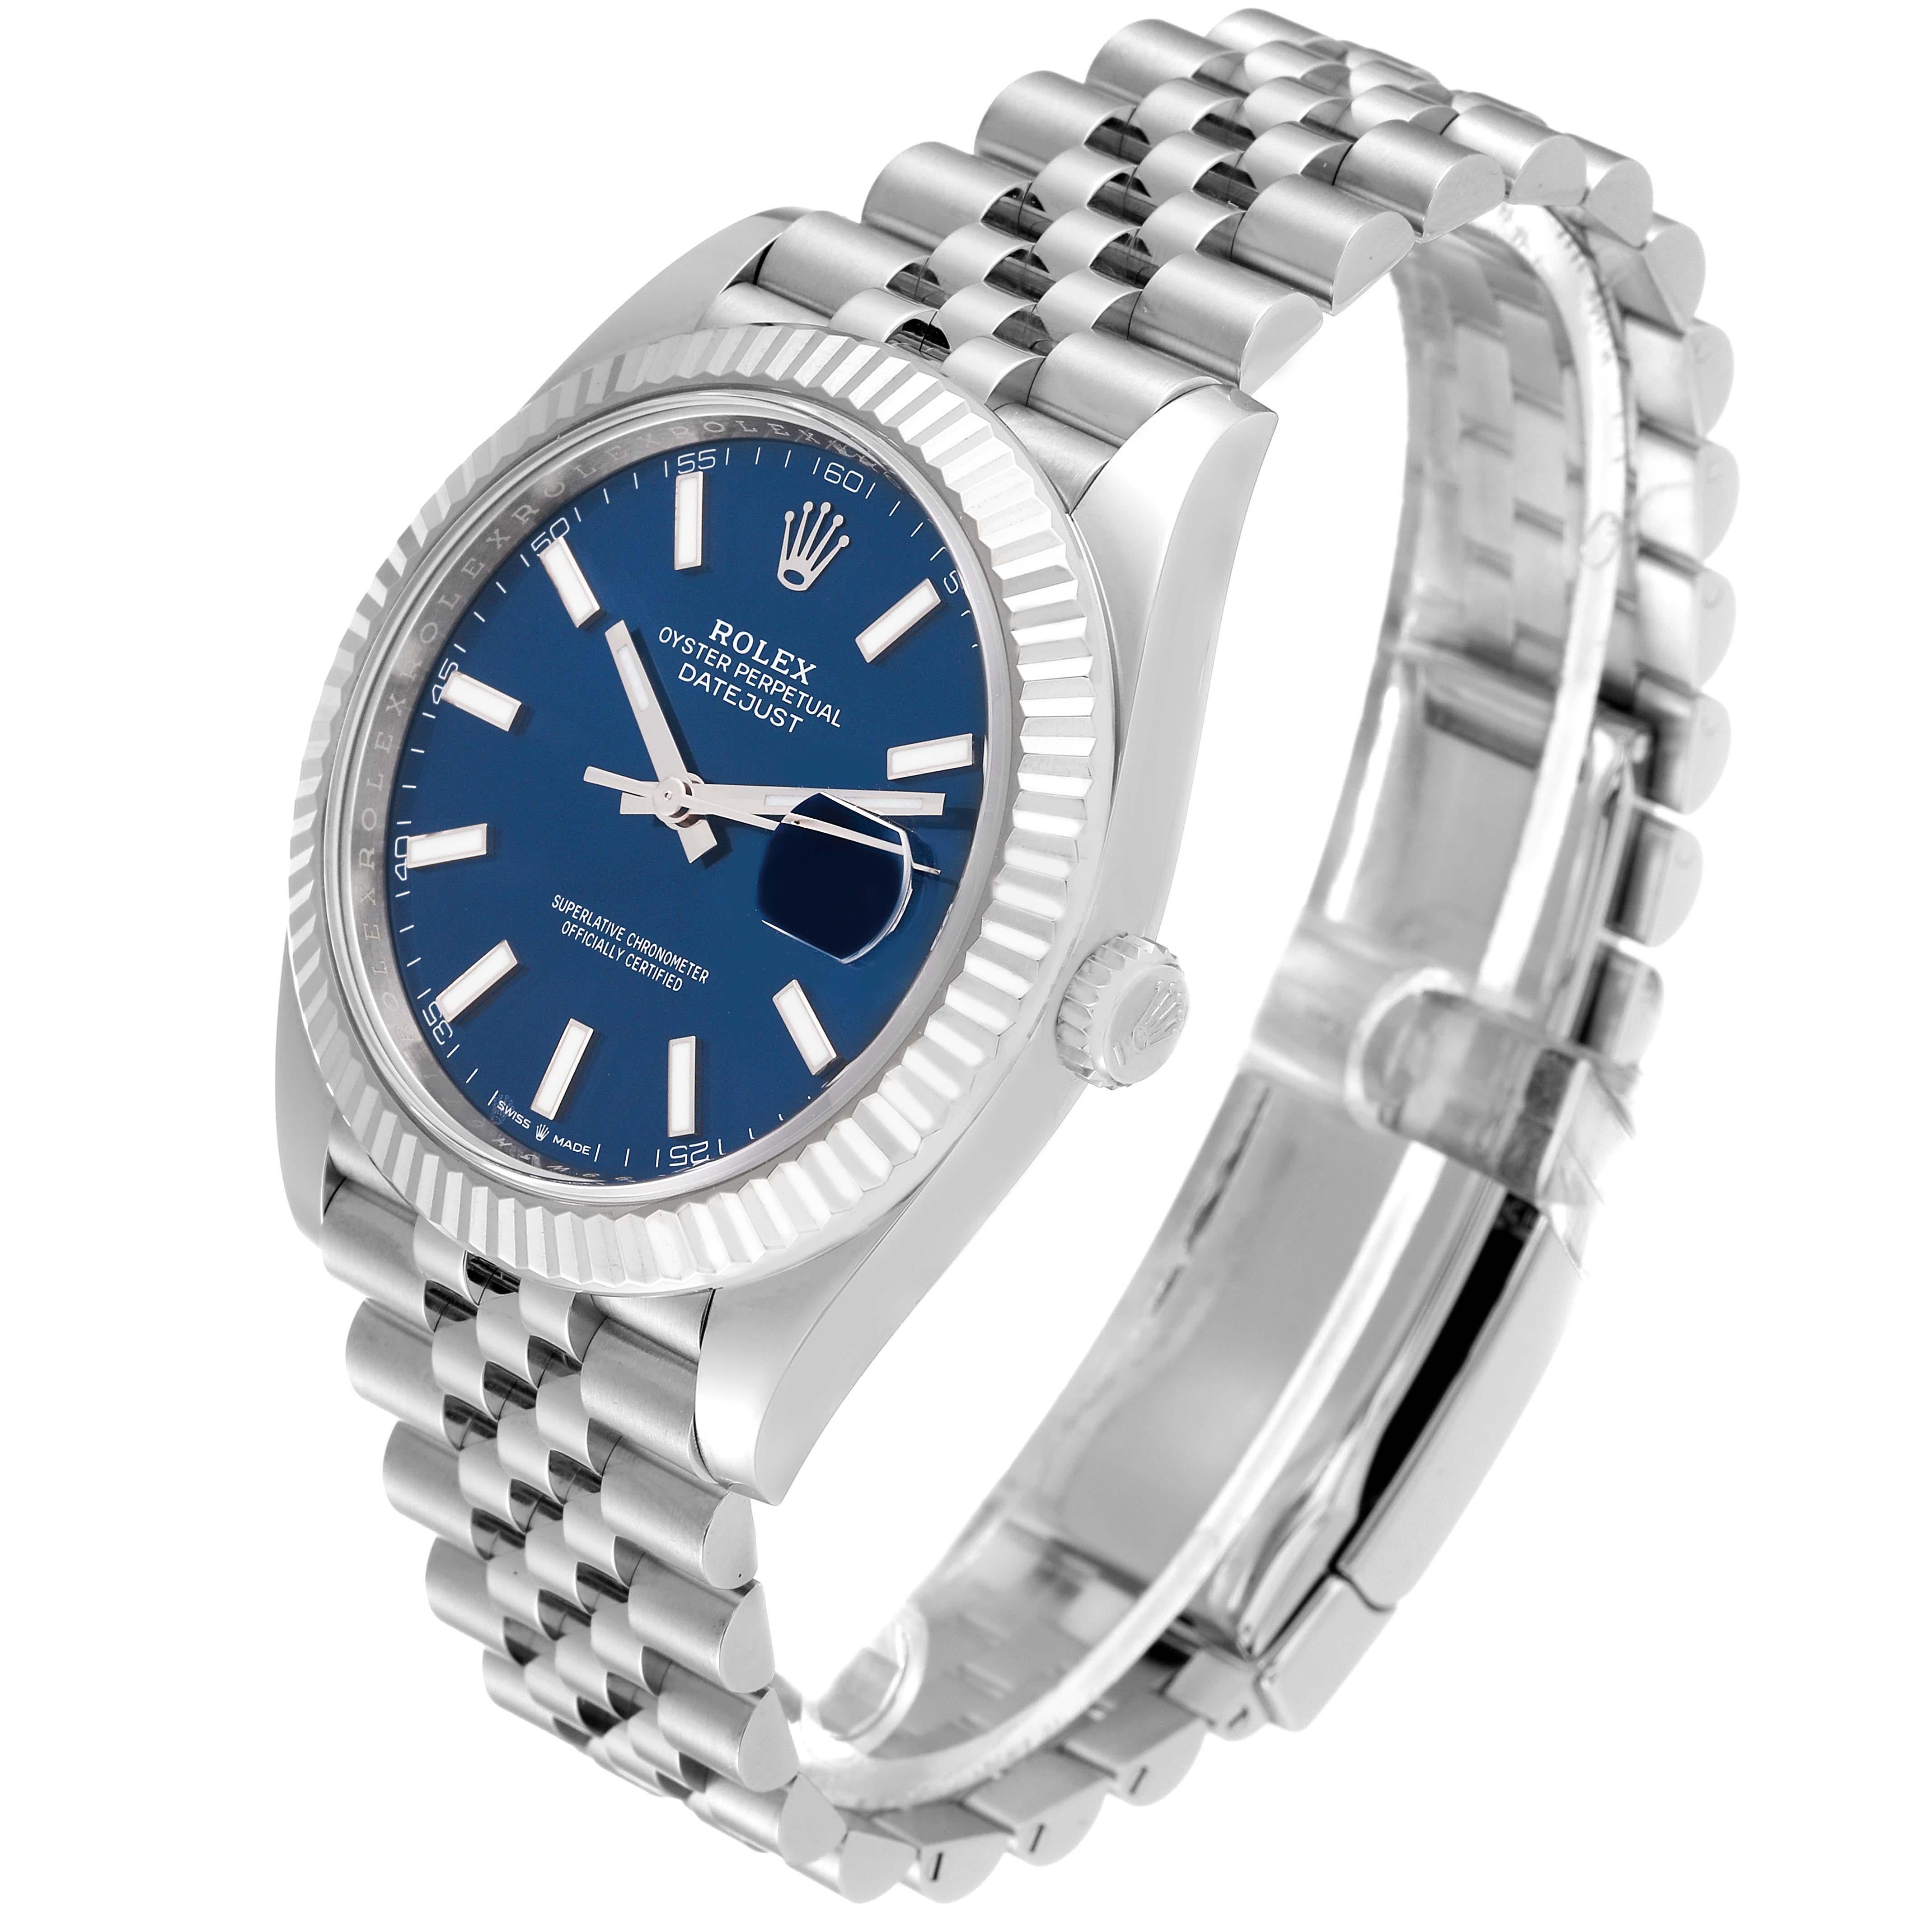 Rolex Datejust 41 Steel White Gold Blue Dial Mens Watch 126334 Box Card 2